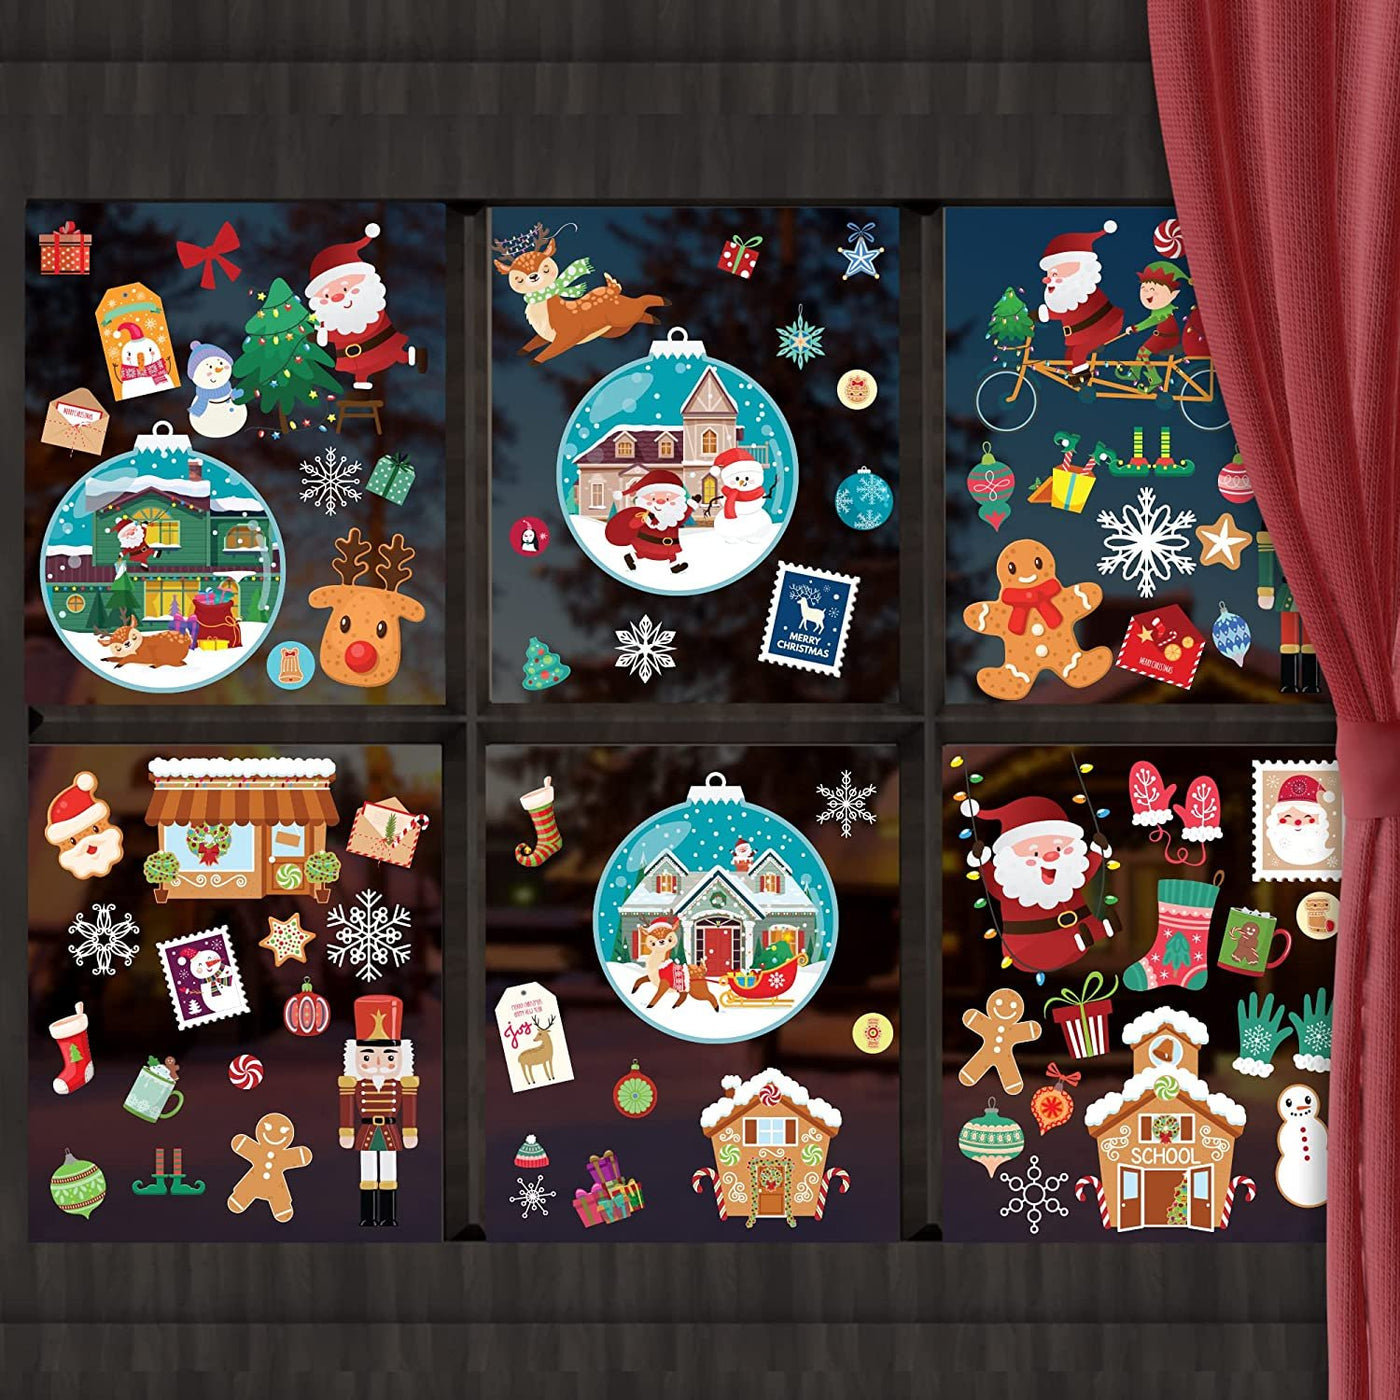 Christmas Window Clings, 300 Stickers Total, Christmas Decals for Windows, 75 Designs, Double Sided Christmas Window Stickers, Decoration for Glass Windows, No Adhesive or Residue, 24 Sheets